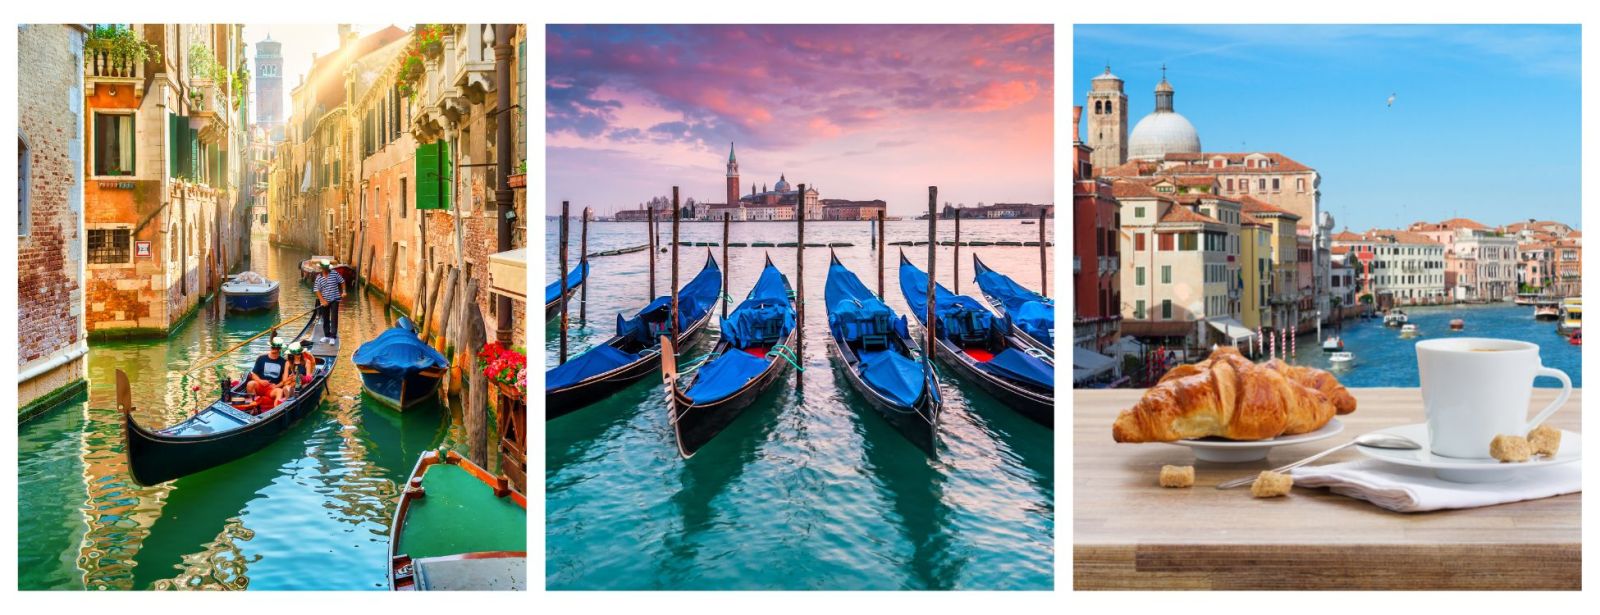 Venice Holidays. Gondalas and canals